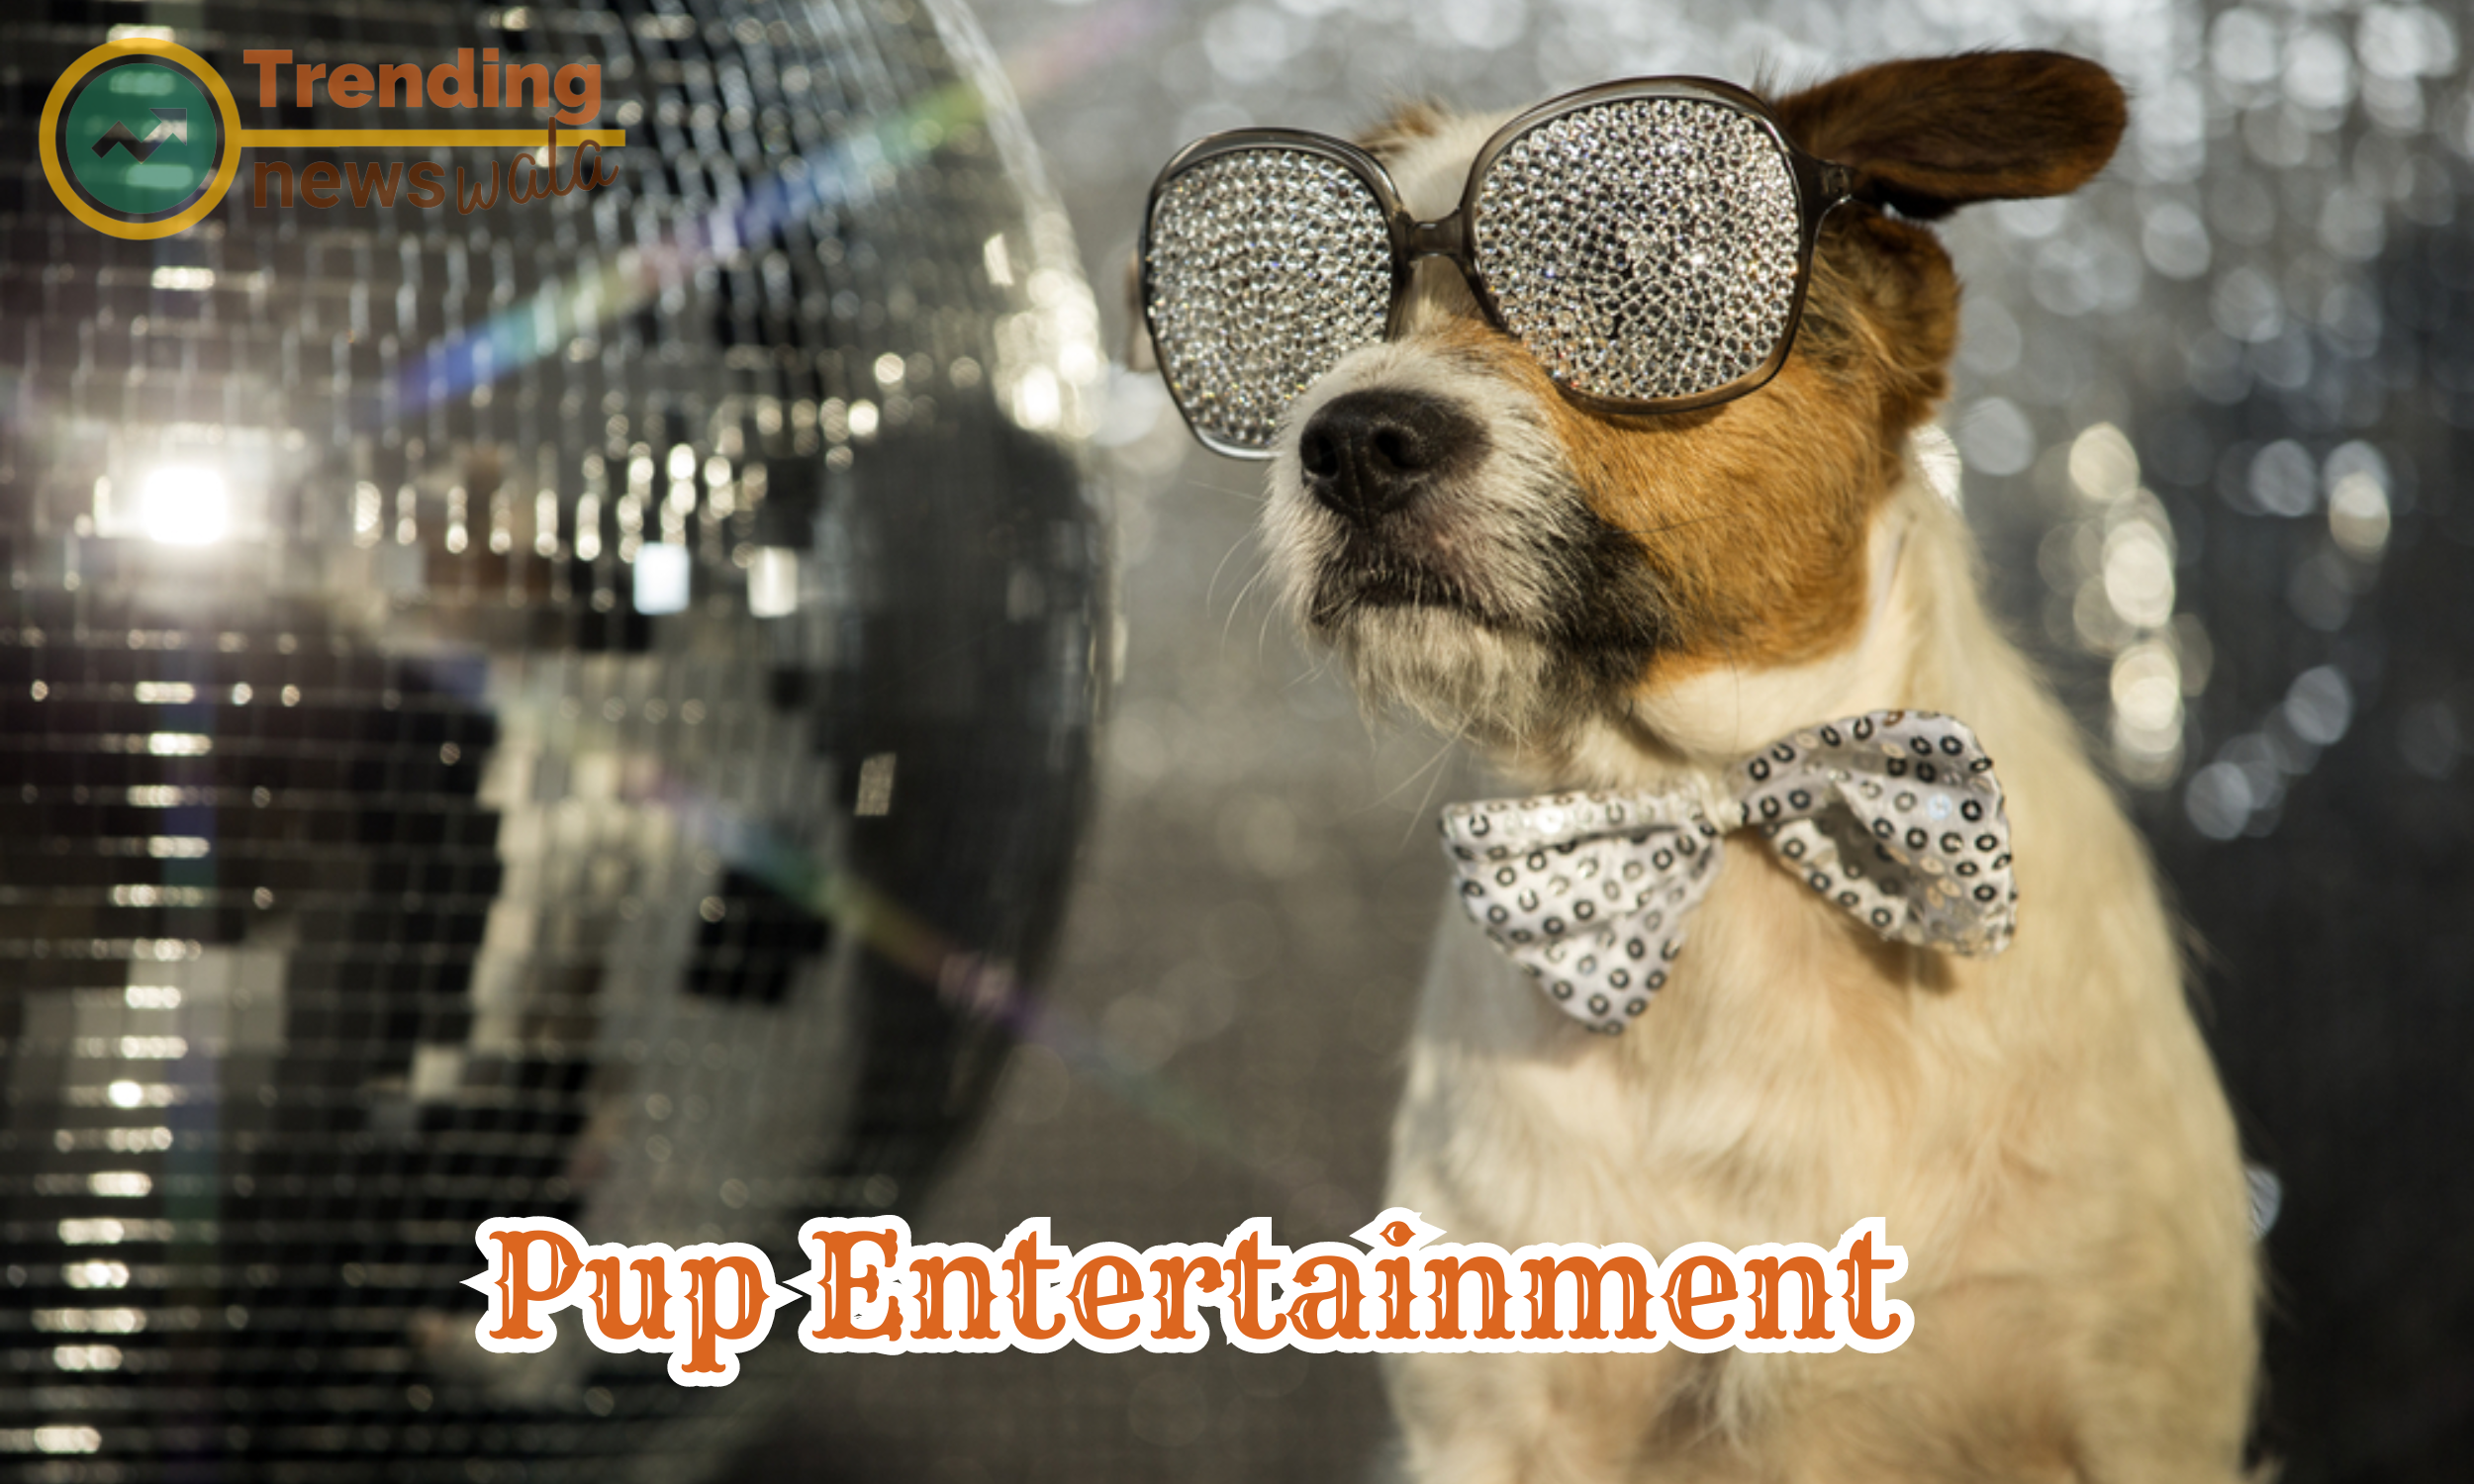  Pup entertainment involves engaging and enjoyable activities designed to keep your puppy